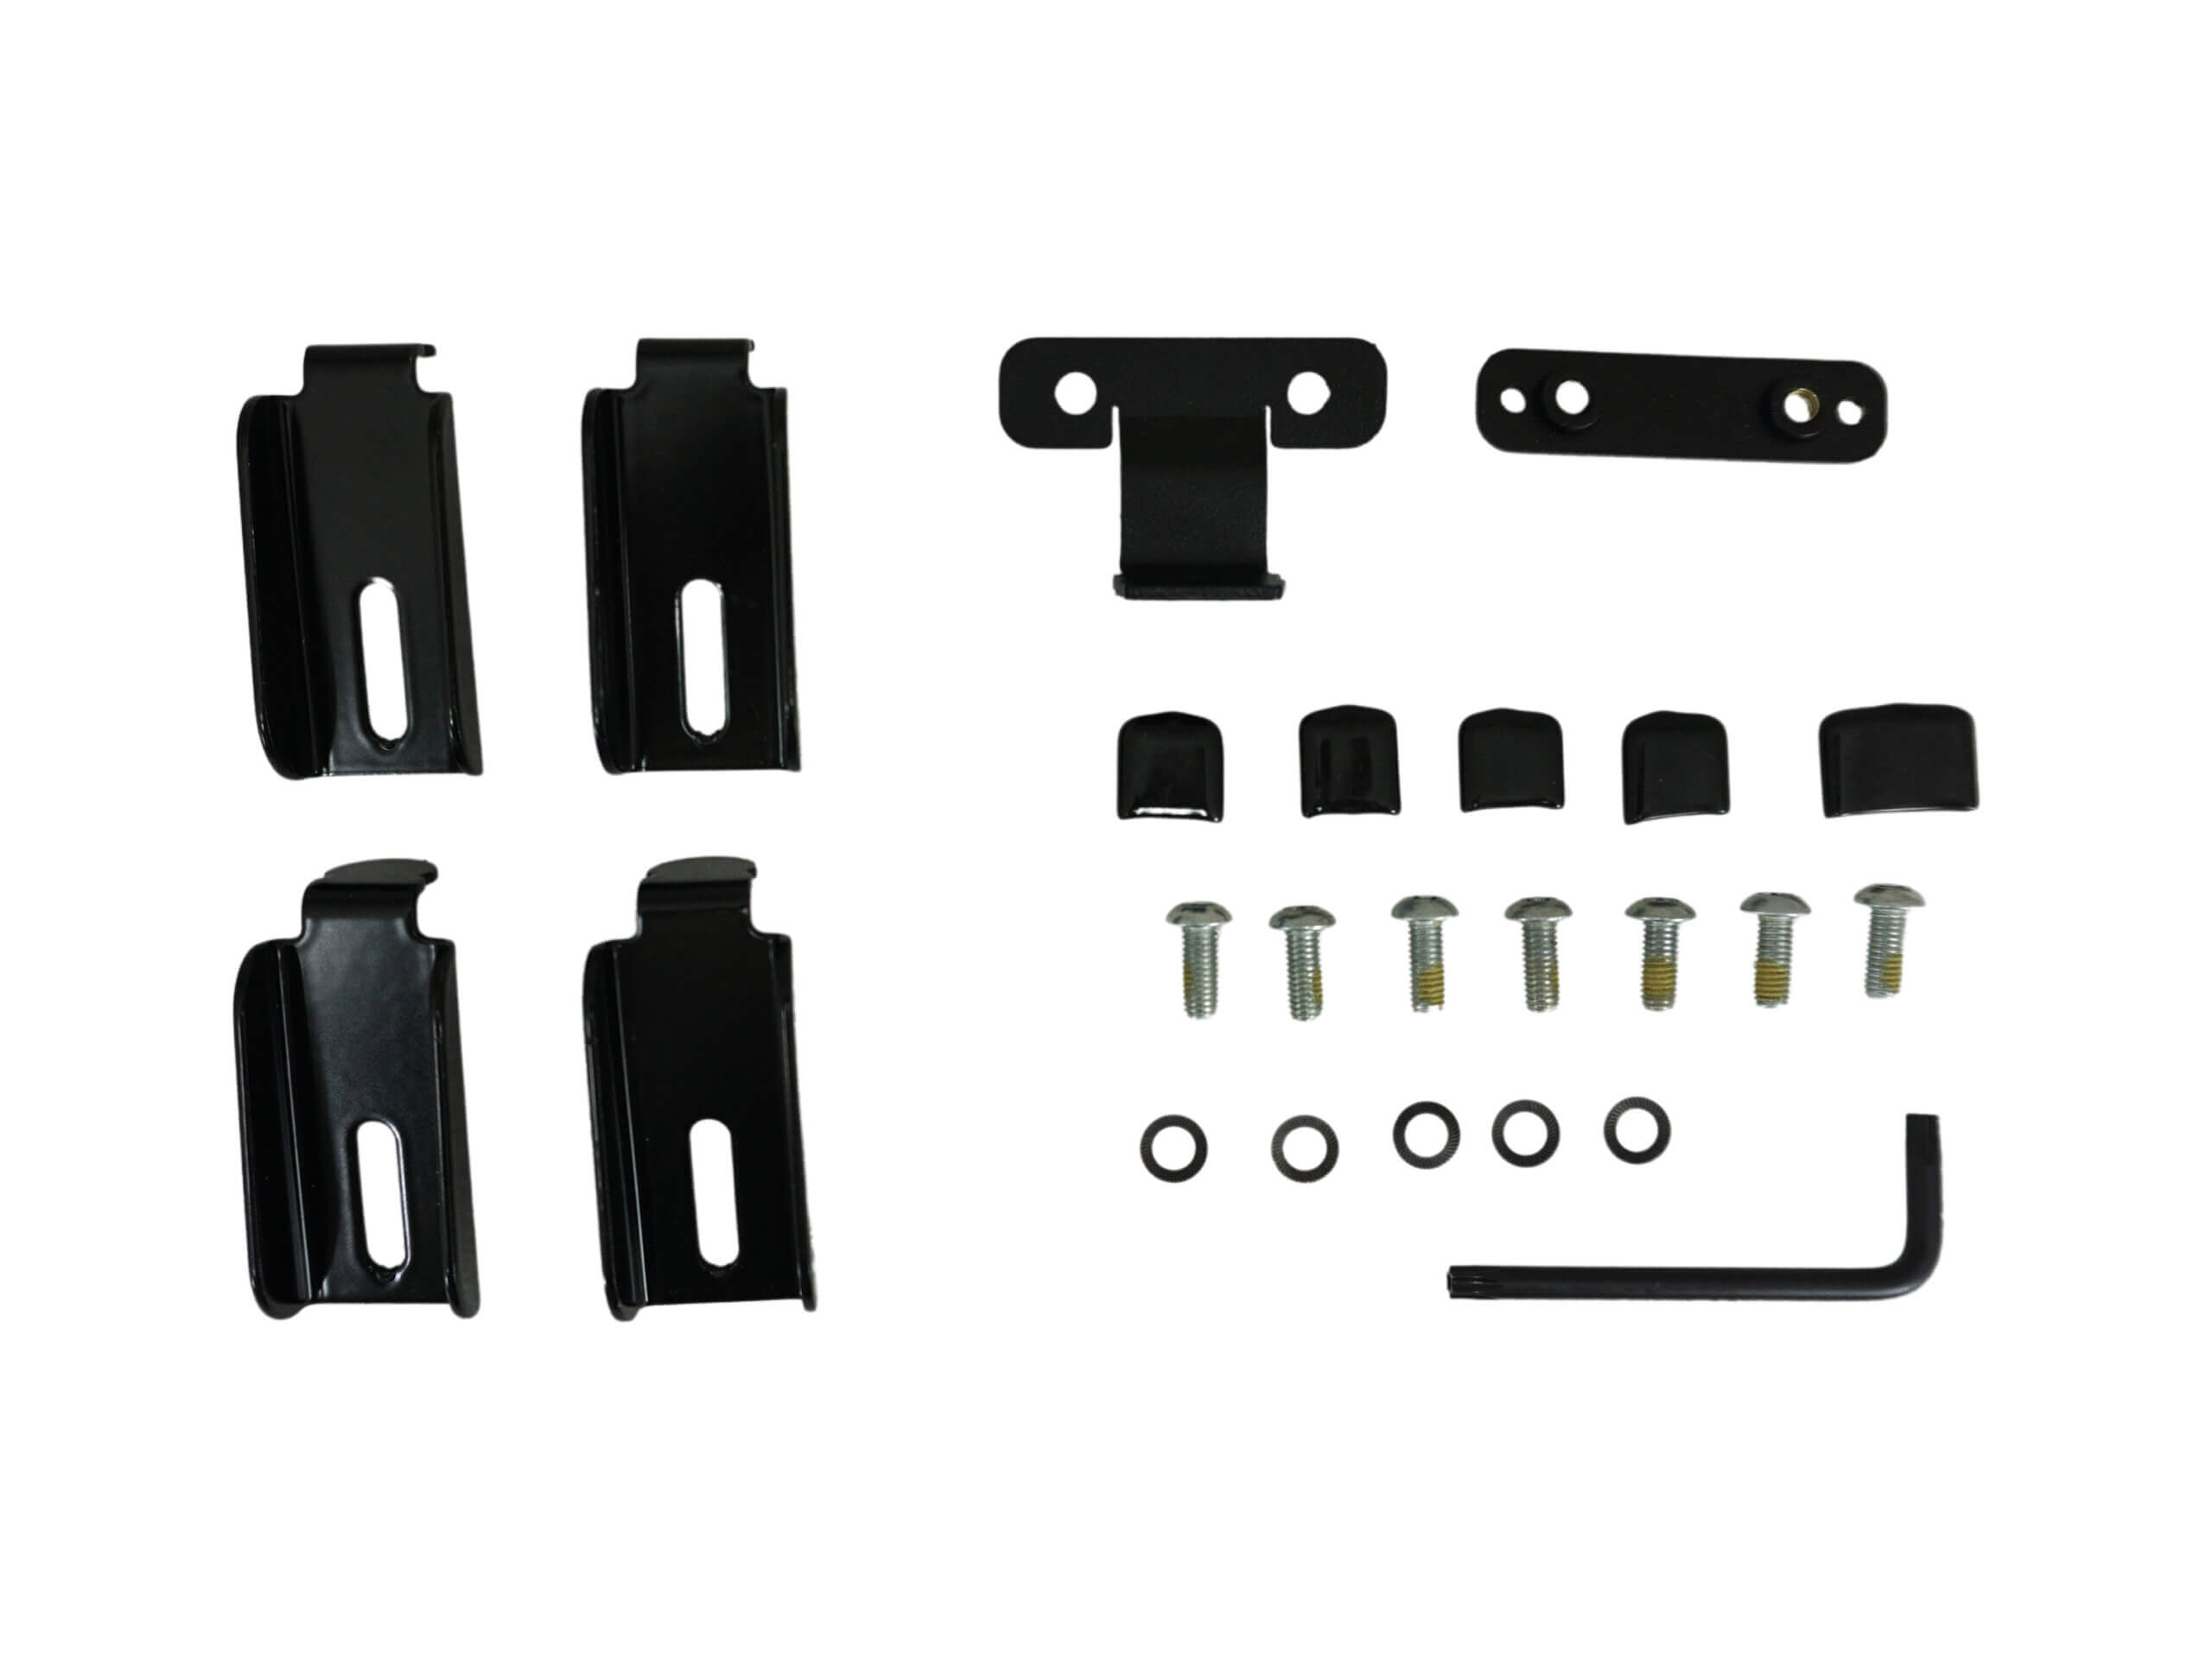 UT-1000 Series Adaptor Lug Kit for Dell 5430 and 7330 Rugged Notebooks